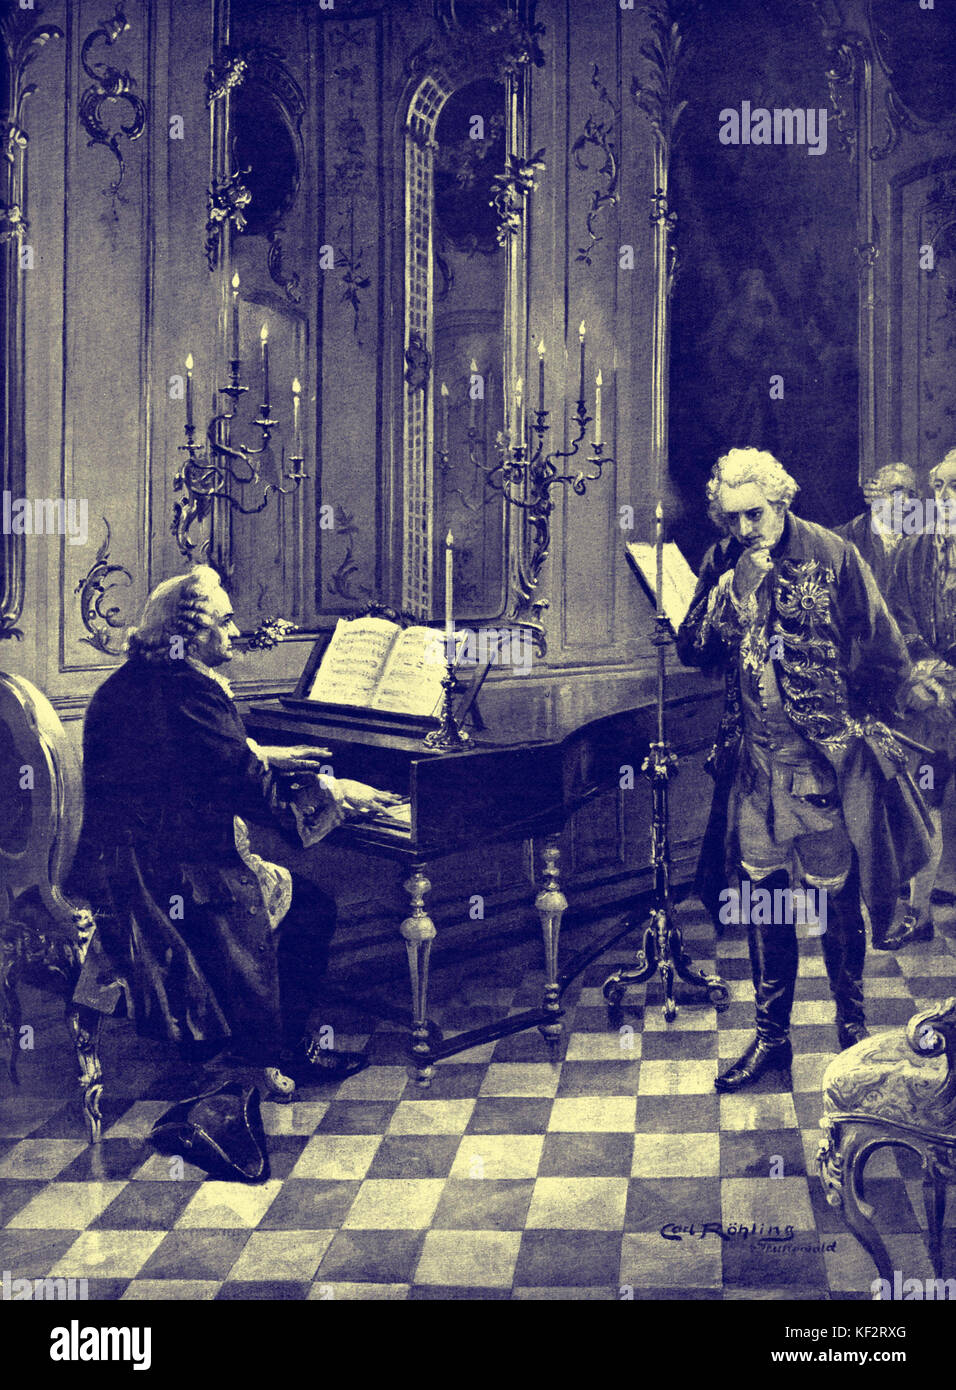 Johann Sebastian Bach playing in front of Frederick the Great at Potsdam by Carl Röhling.  German composer & organist, 1685-1750. Stock Photo